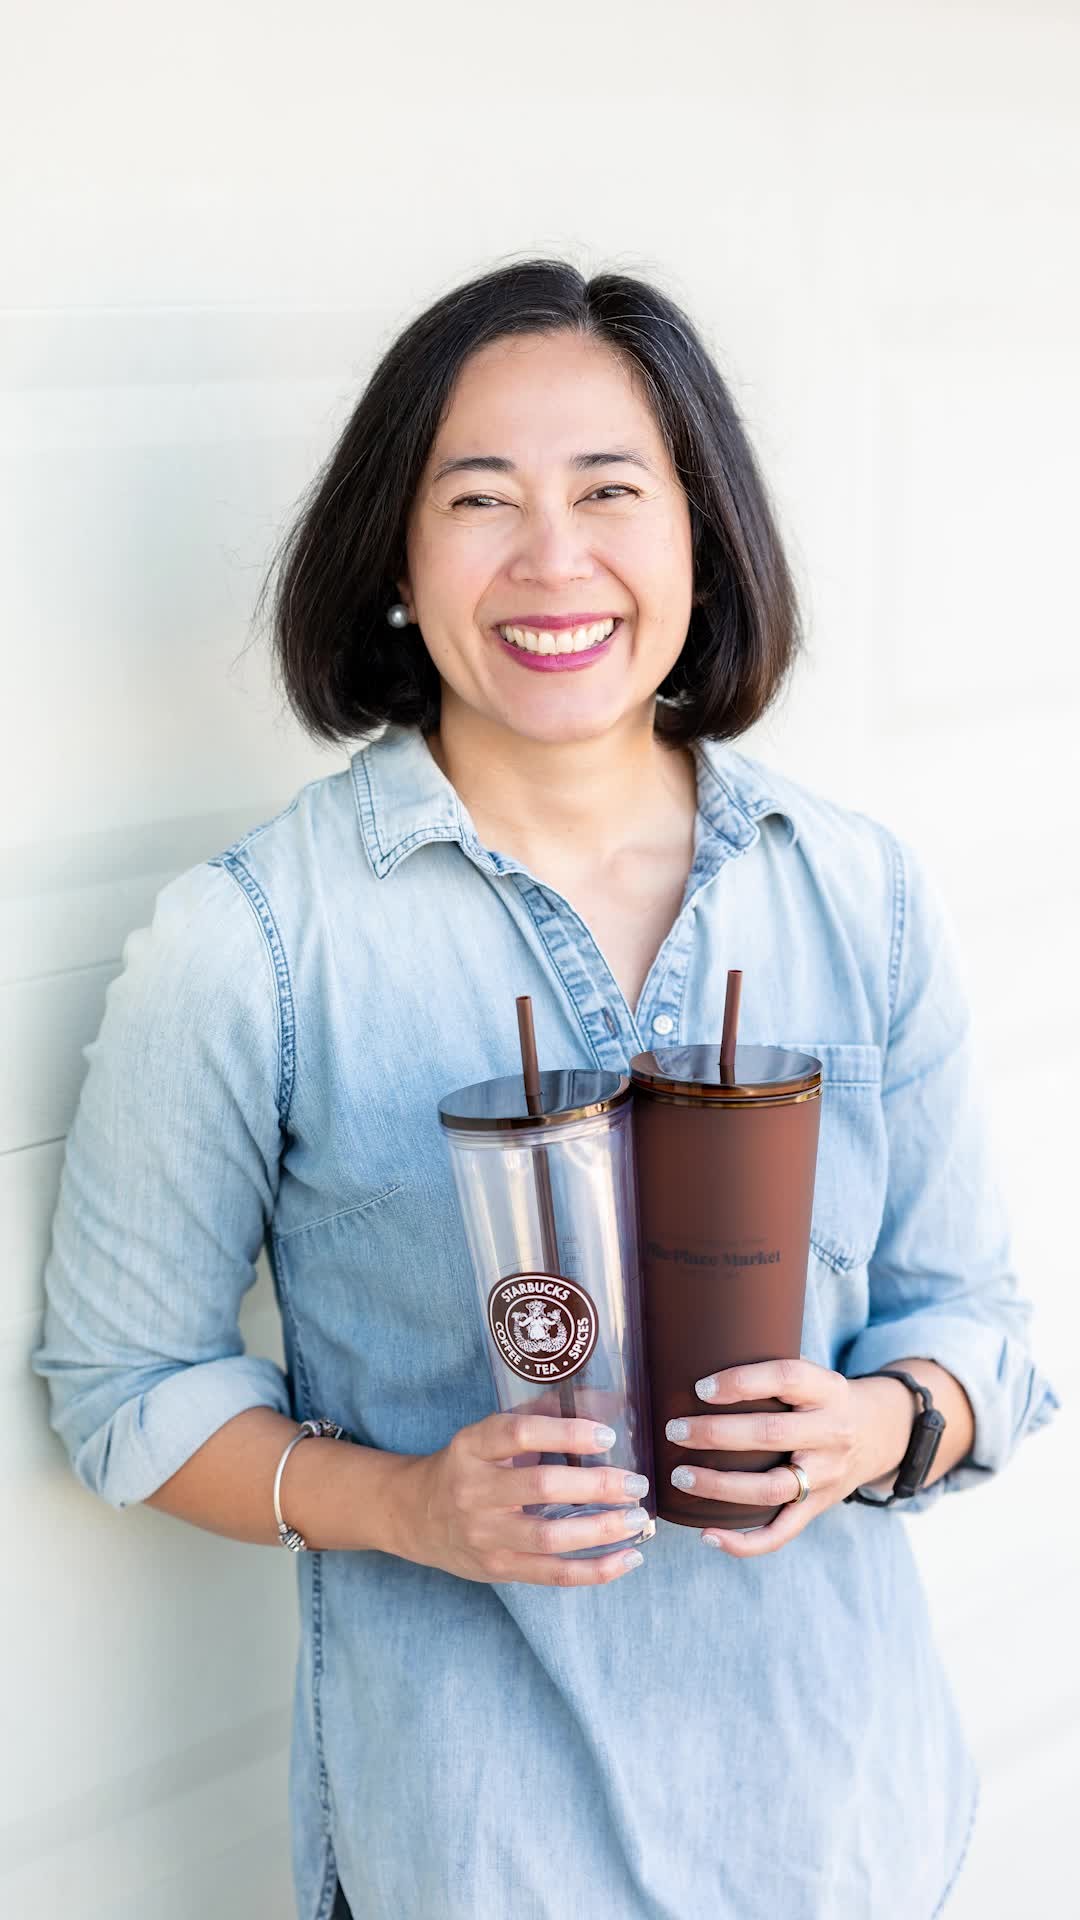 I went to the #StarbucksFirstStore at Pike Place Market in Seattle! Of course I bought  Limited Edition First Store cups and absolutely did a shoot with them at home! 😅  Check out this reel to see my pilgrimage to my "coffee holy land" and my photo session at home. Thank you @chongkeepops for taking my headshots 😁⁠
⁠
#Starbucks #SummerCups #pikeplacemarket #seattle #tourist #starbucksmecca #pilgrimage #obsessed #starbuckscollector #brandphotoshoot #modelmode #portraitphotographer #familyphotographer #stocktonfamilyphotographer #lodiphotographer #lodifamilyphotographer #giachongphotography